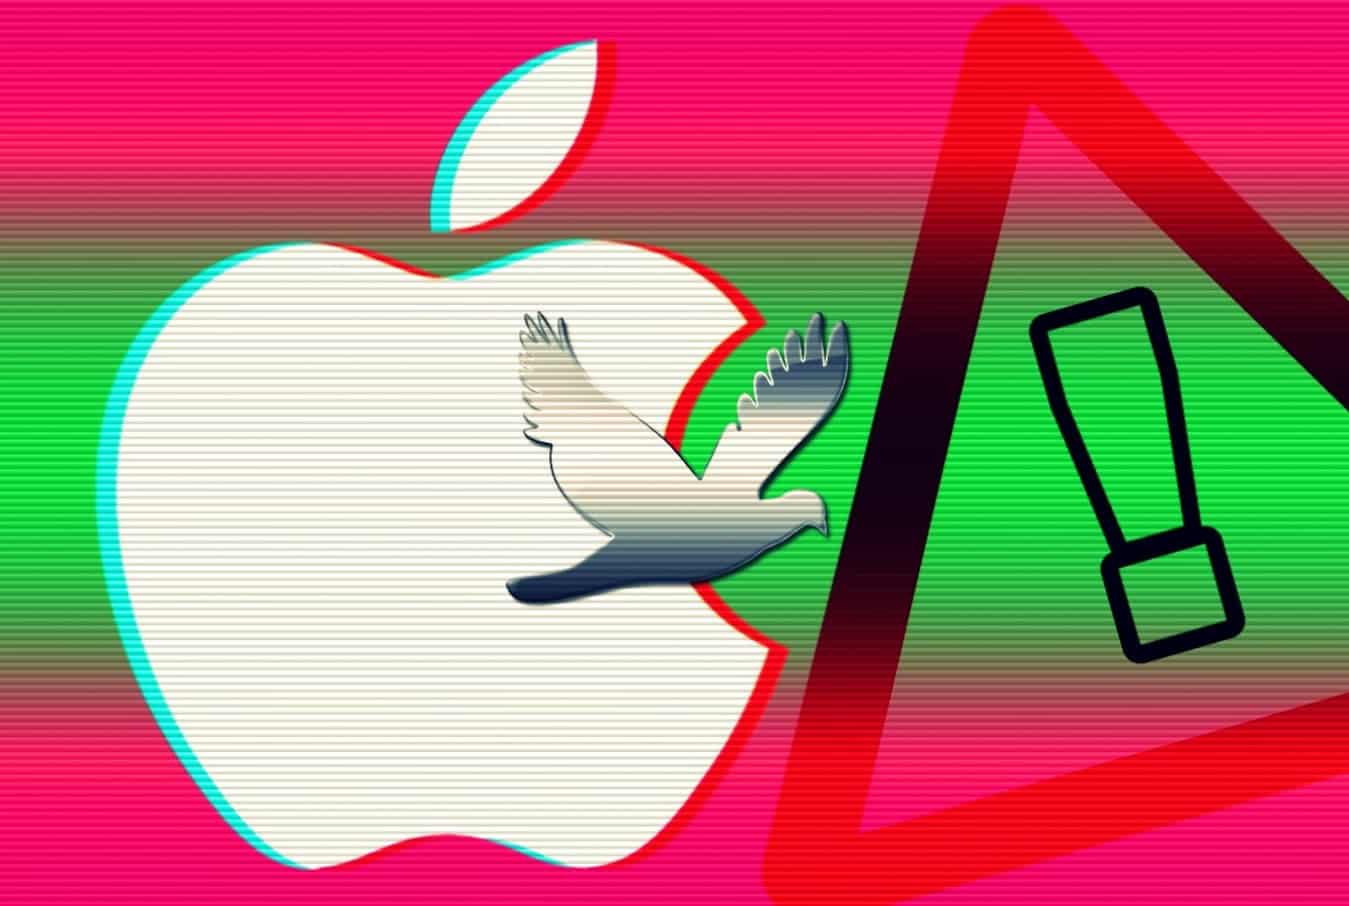 Silver Bird malware on 30,000 Macs leaves most security pros confused